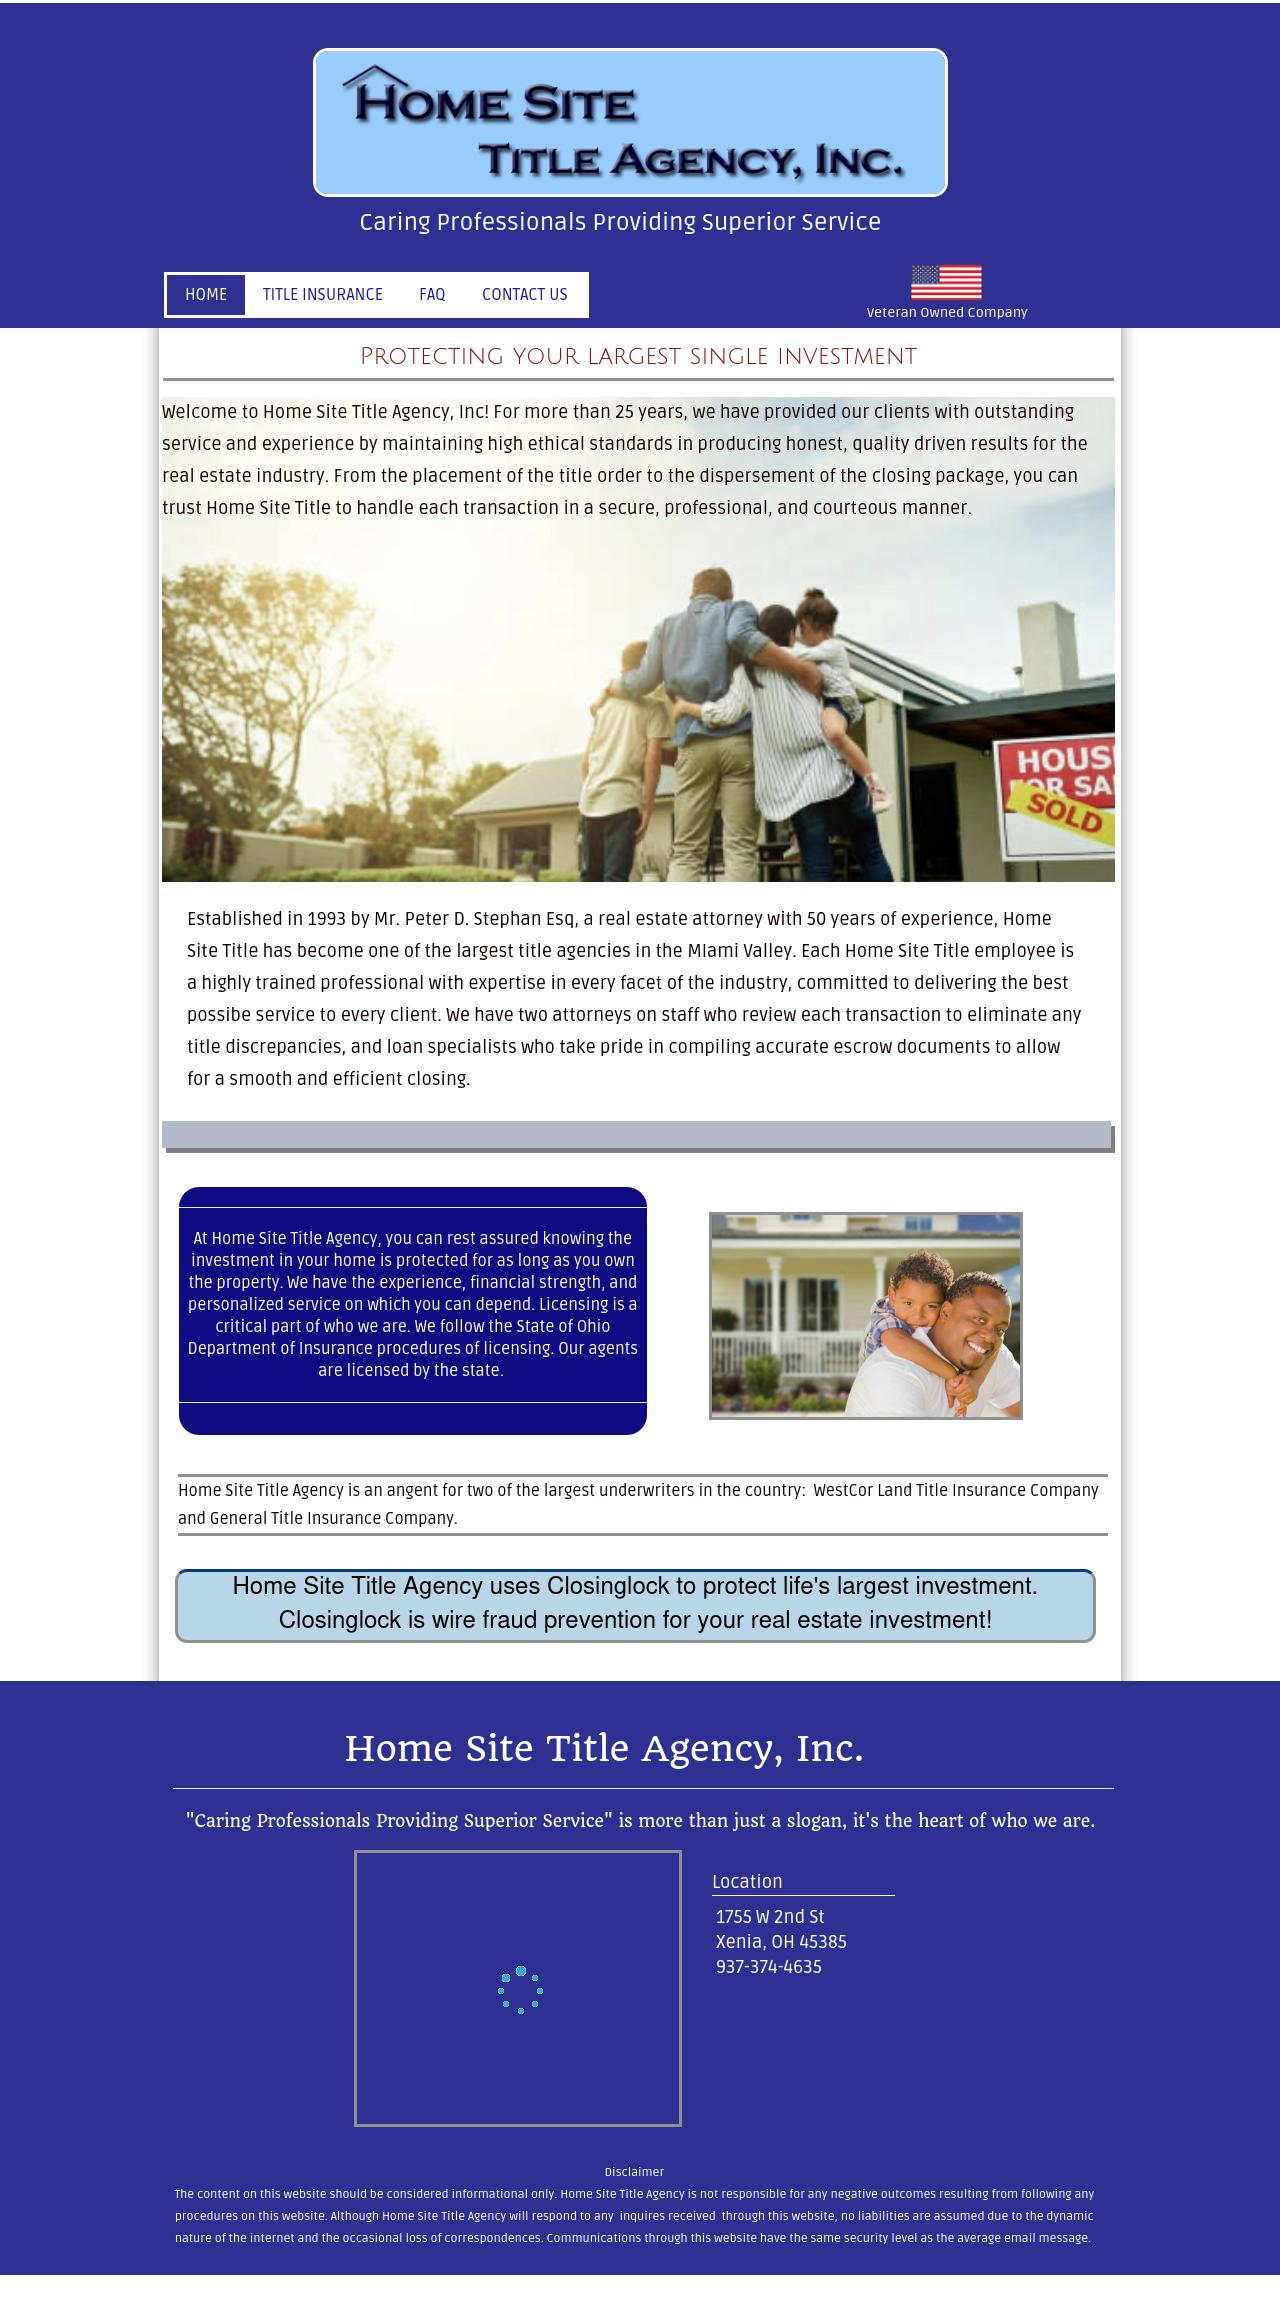 Home Site Title Agency Inc - Xenia OH Lawyers